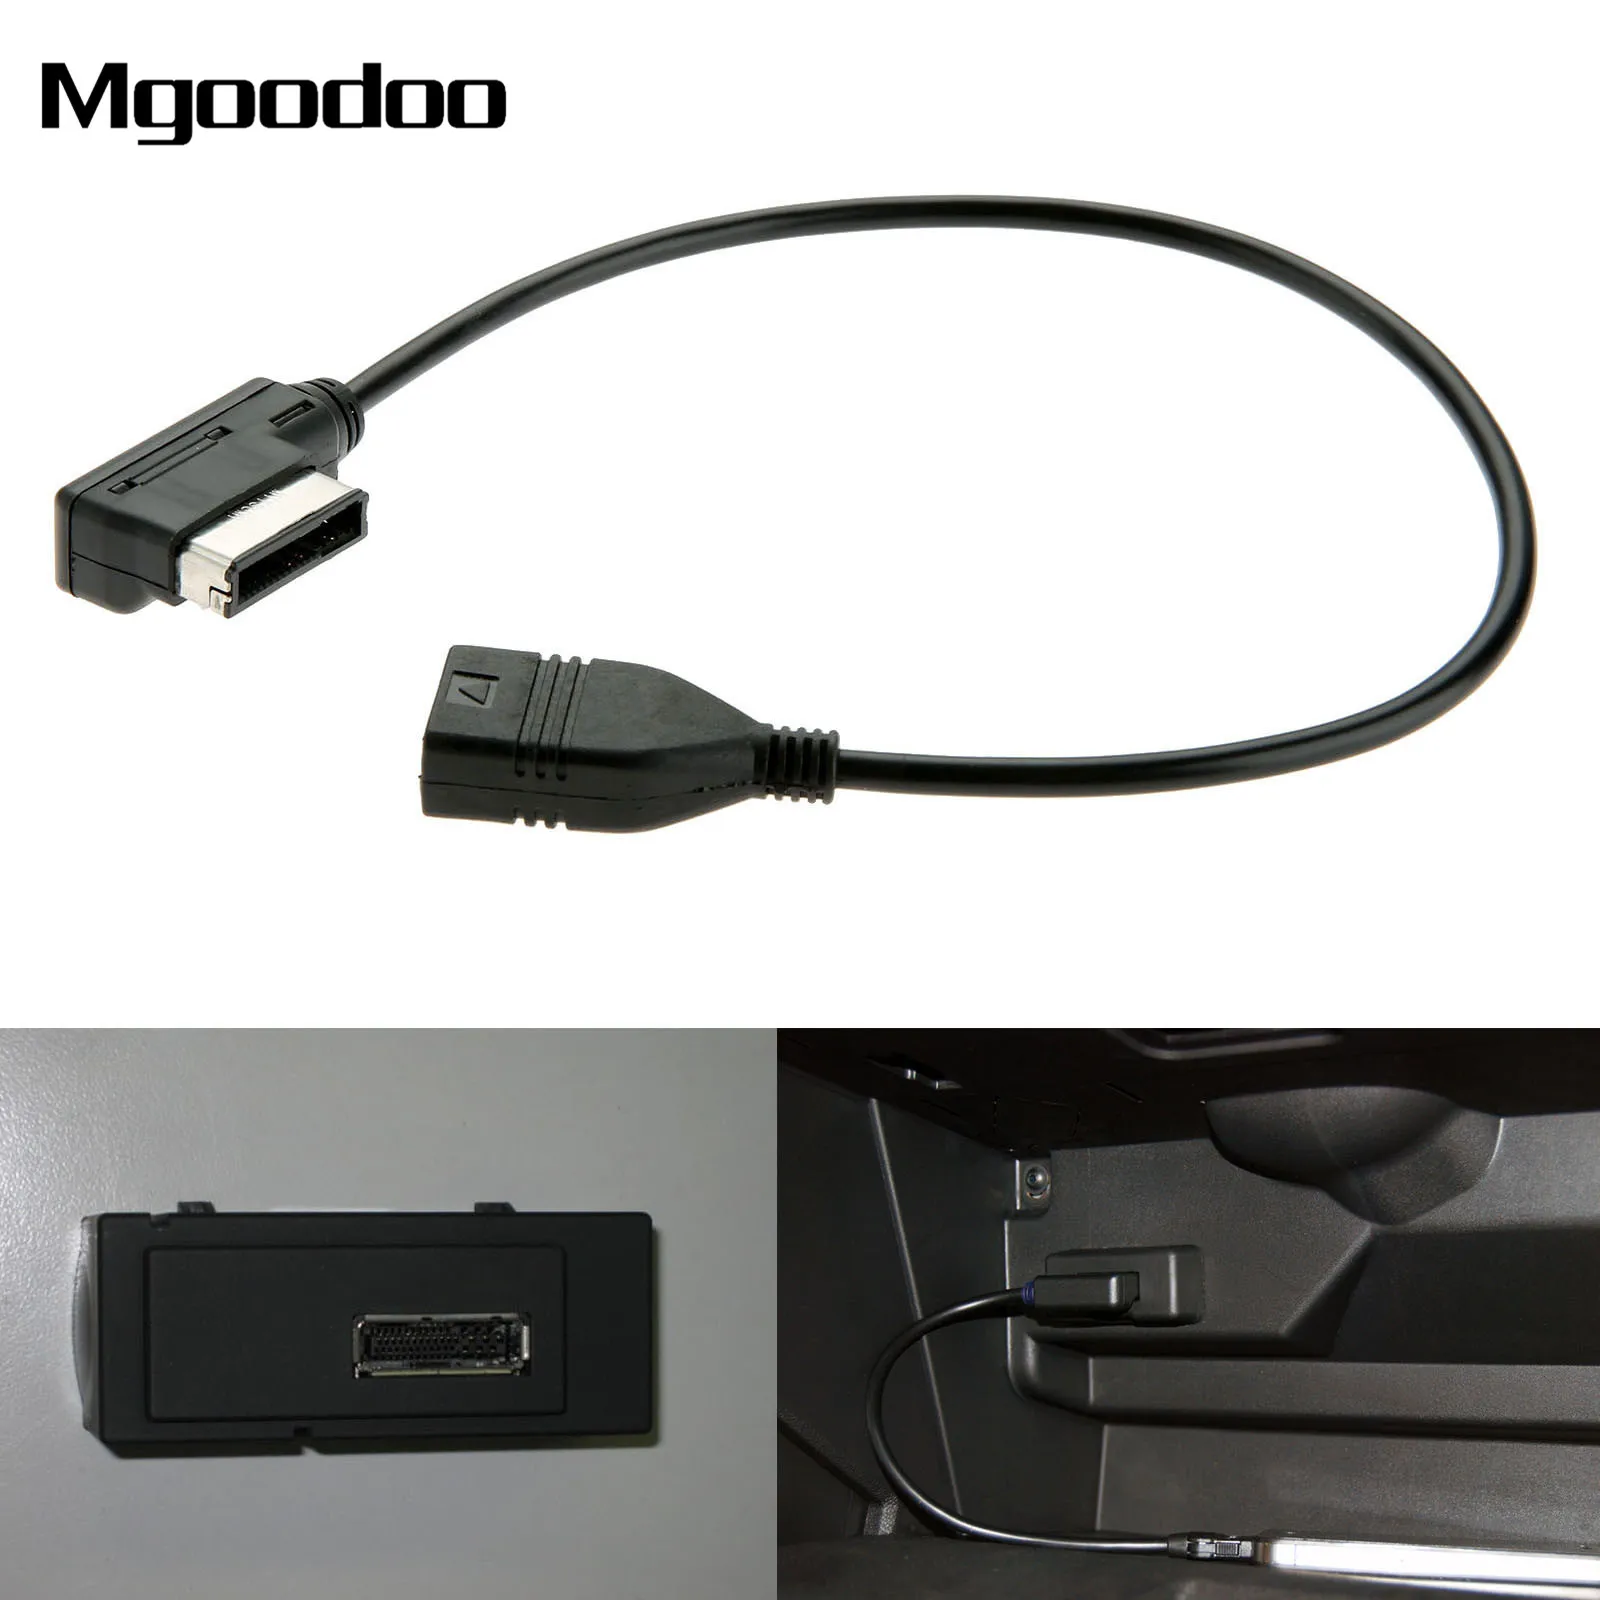 USB Drive Data Sync Transfer & Charging JIMAT Audi AMI MDI MMI to USB AUX Audio Music Interface AUX-in Media-in Audio Cable Adapter for Audi A3 A4 A5 A6 S5 A6 A8 Q7 S4 A3 A4 A5 Volkswagen